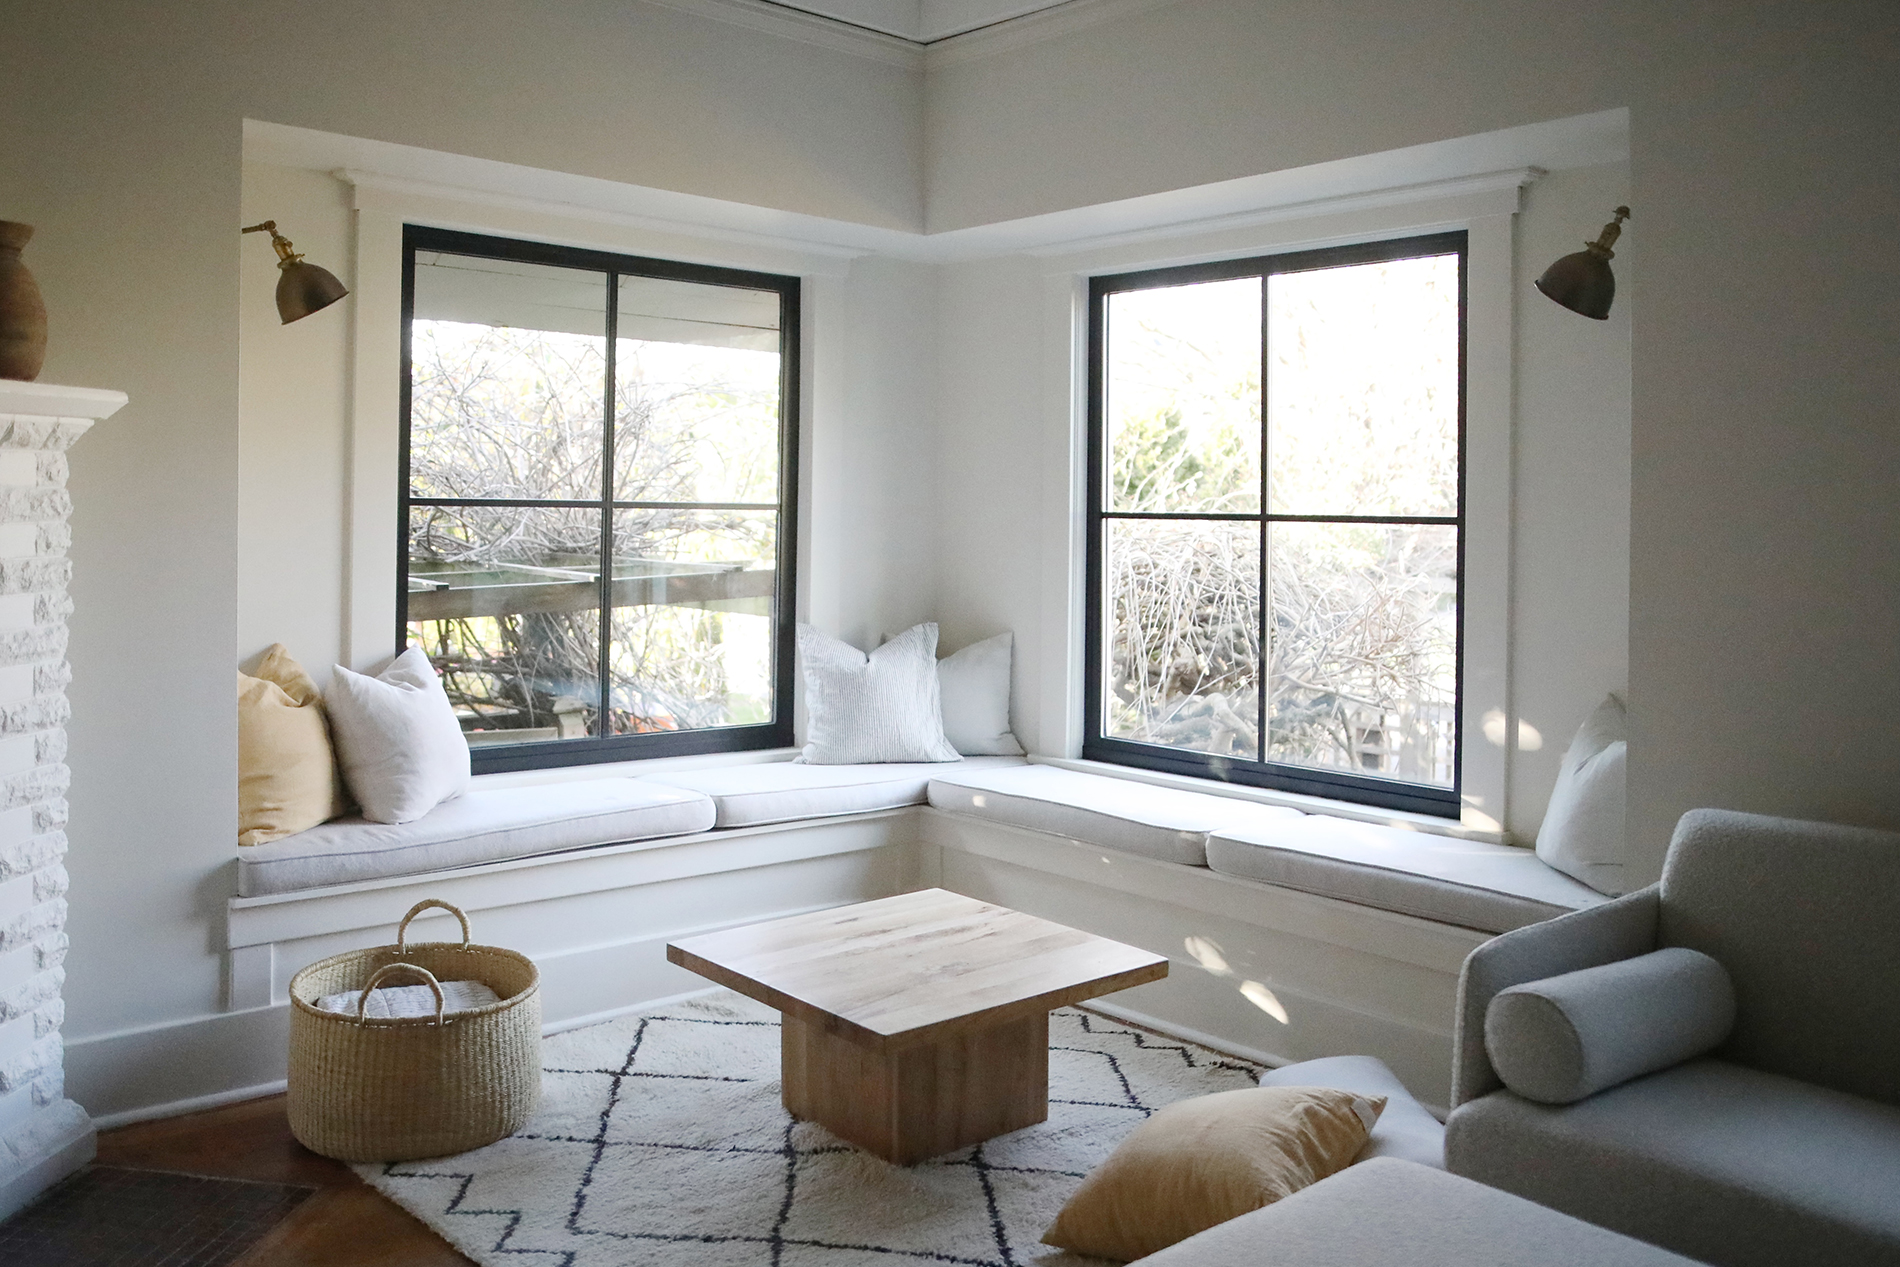 A comfortable seating area interior with accent pillows for additional décor and large black vinyl windows with grids. 